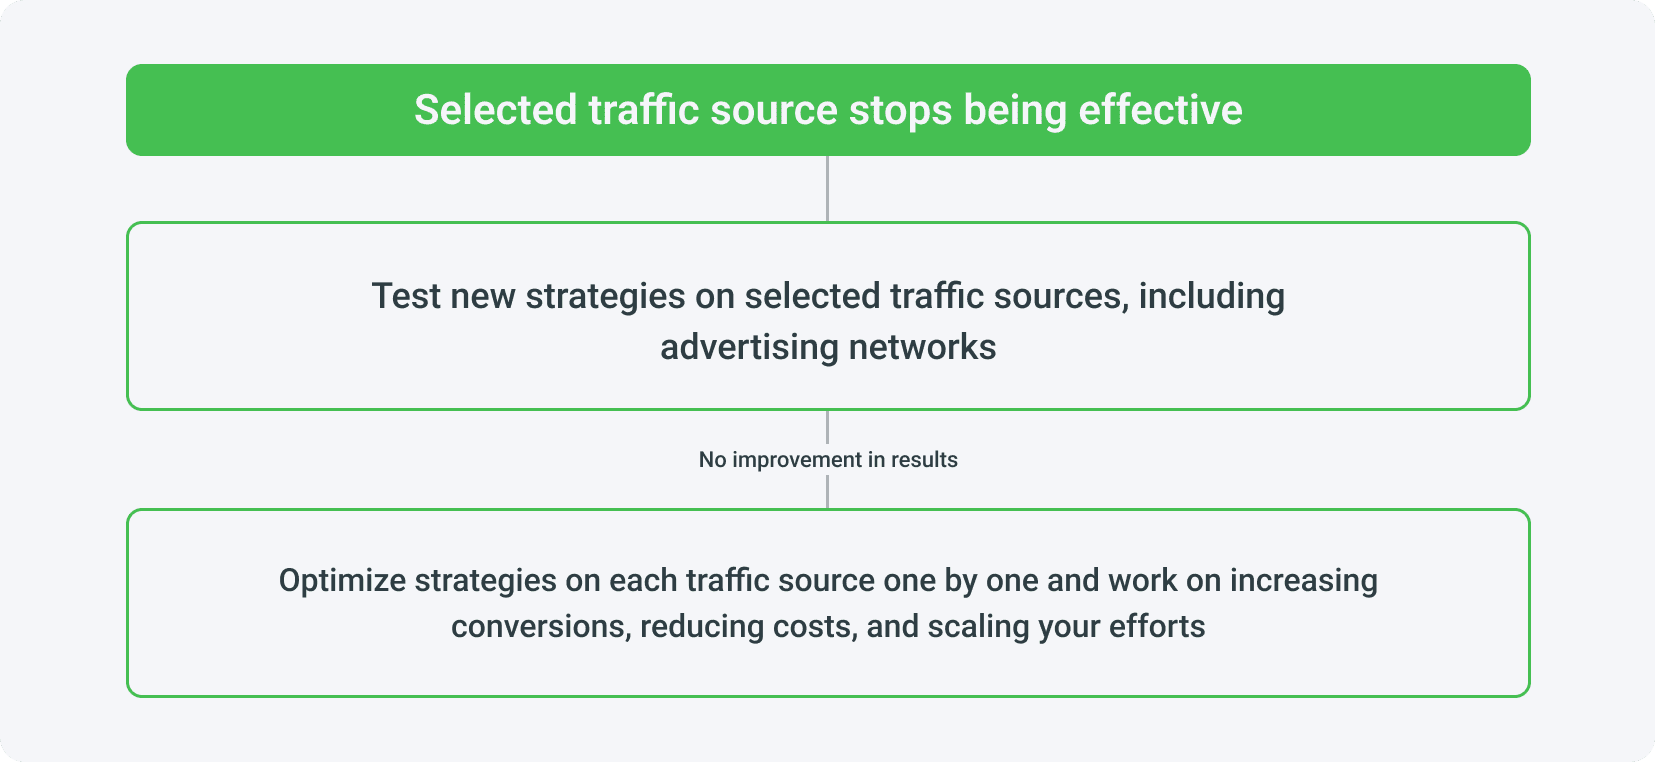 What to do when a selected traffic source is no longer effective?